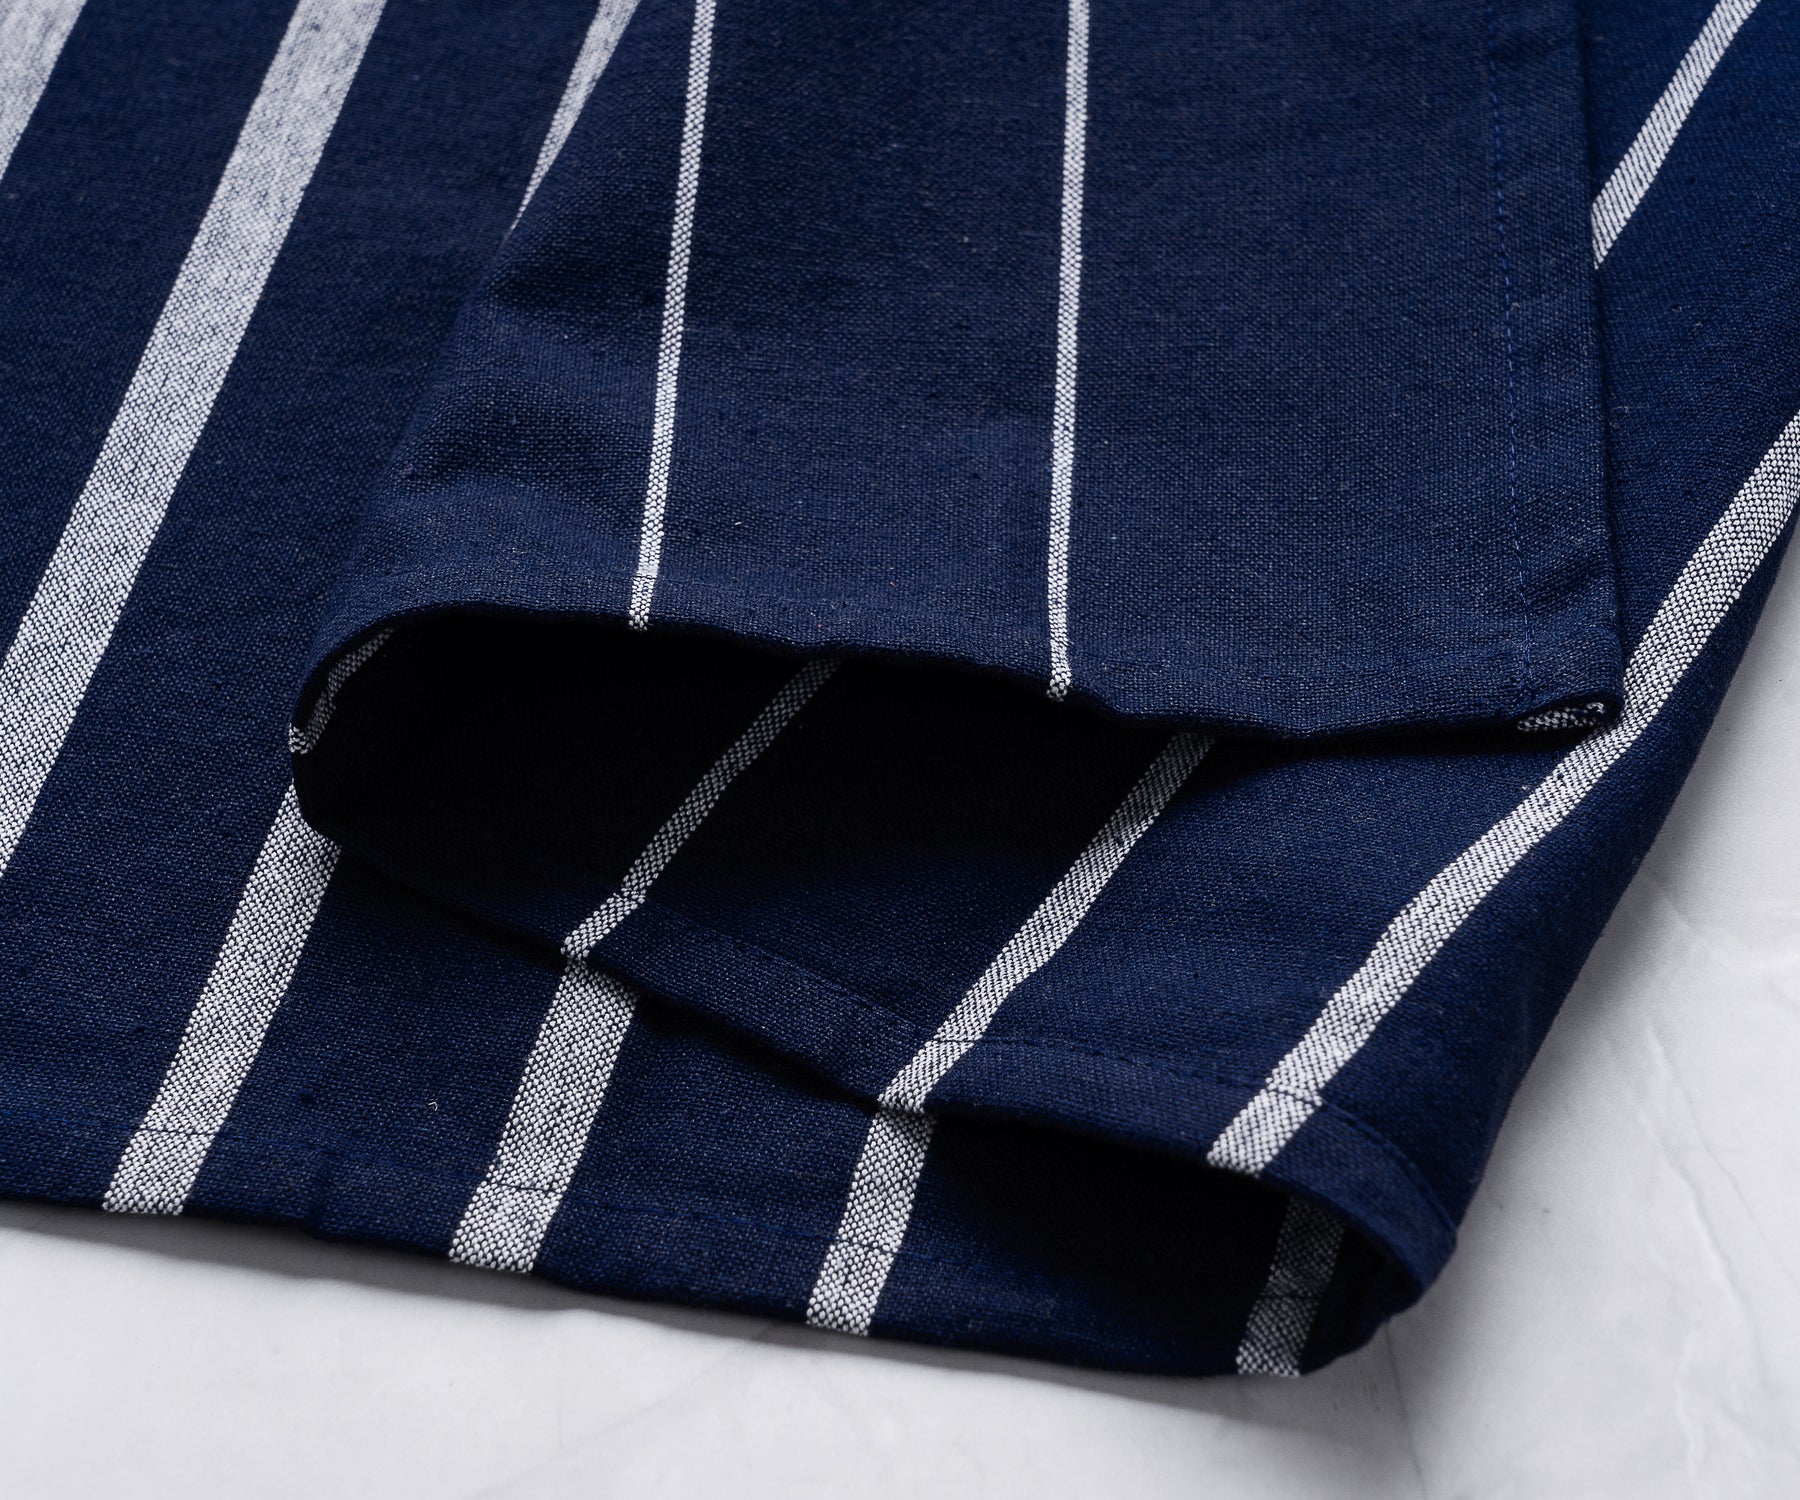 Hanging Hand Towel, Blue Dish Towel Set, Kitchen Towels with Loops, Fall Tea Towels, Absorbent Dish Towels Blue and White.Close-up texture of a blue and white striped rectangular dish towel